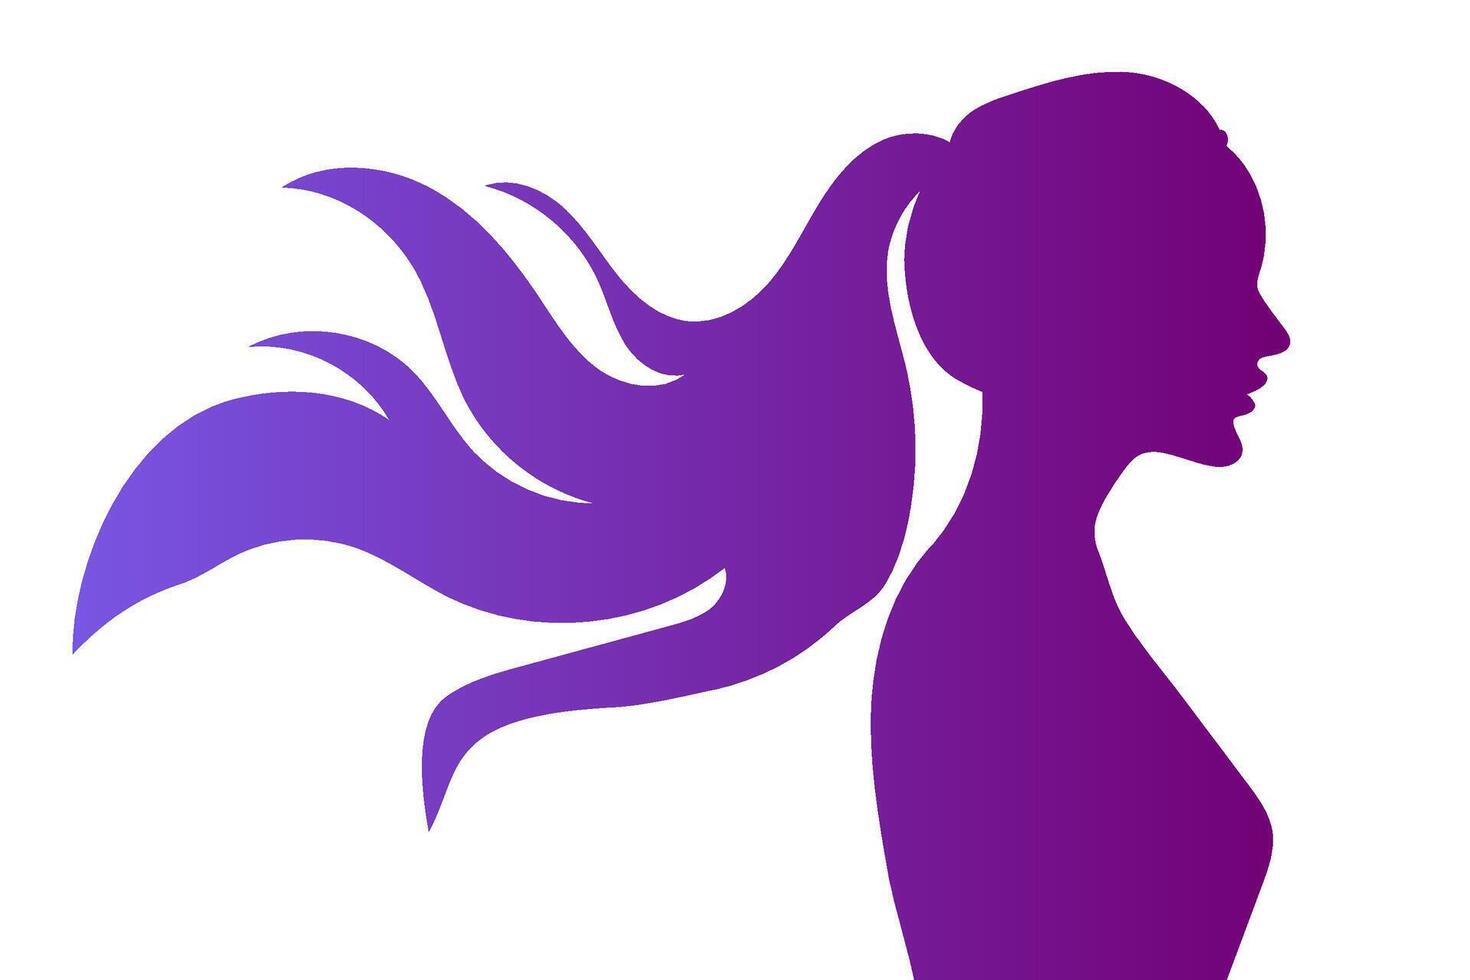 happy womens day woman side view silhouette vector